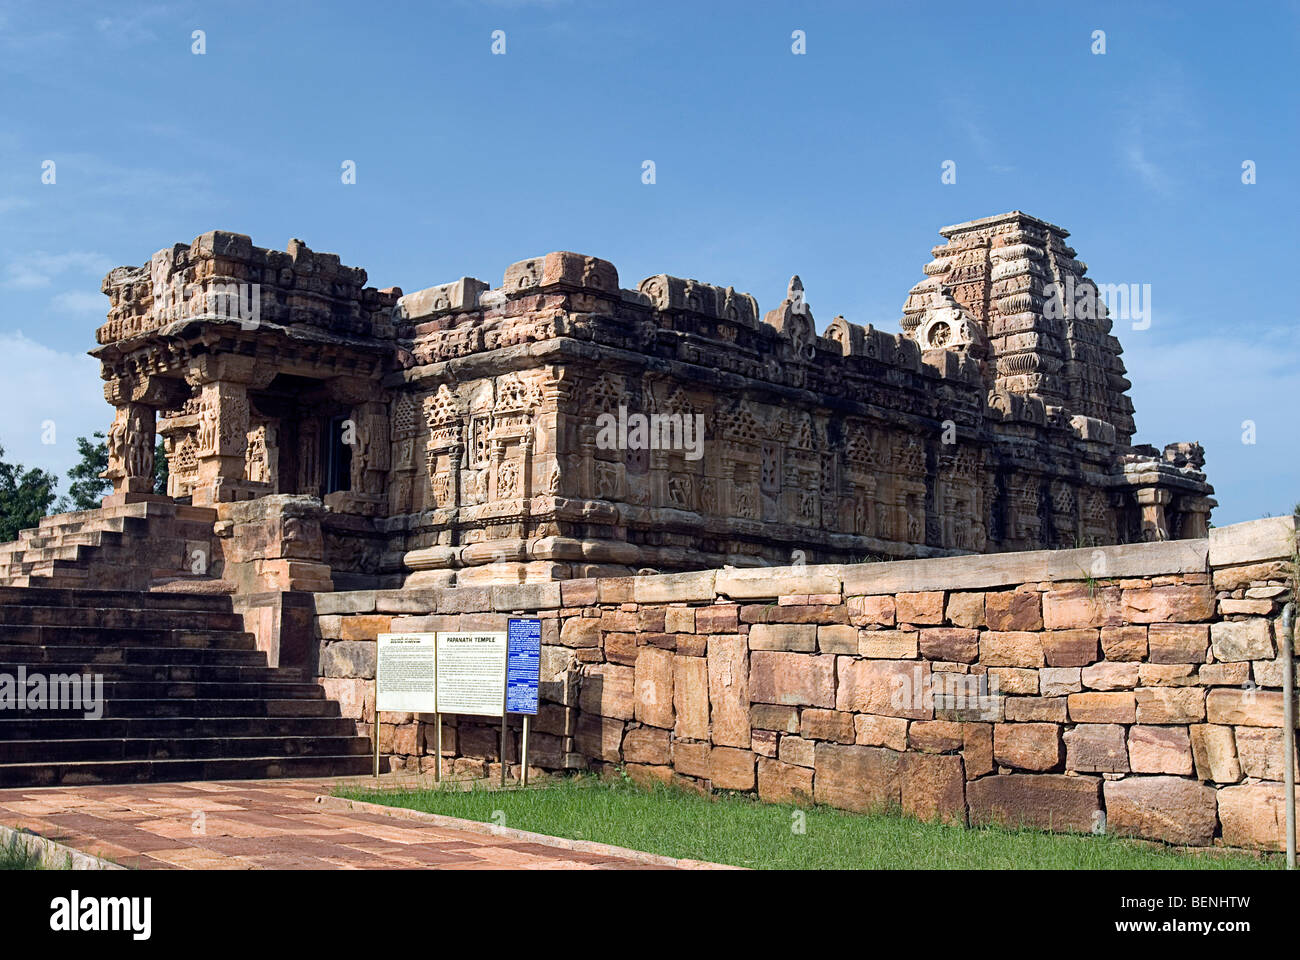 The Papanatha Temple built around 740 A.D. on a plinth of five mouldings embellished with animal motifs floral designs and Stock Photo